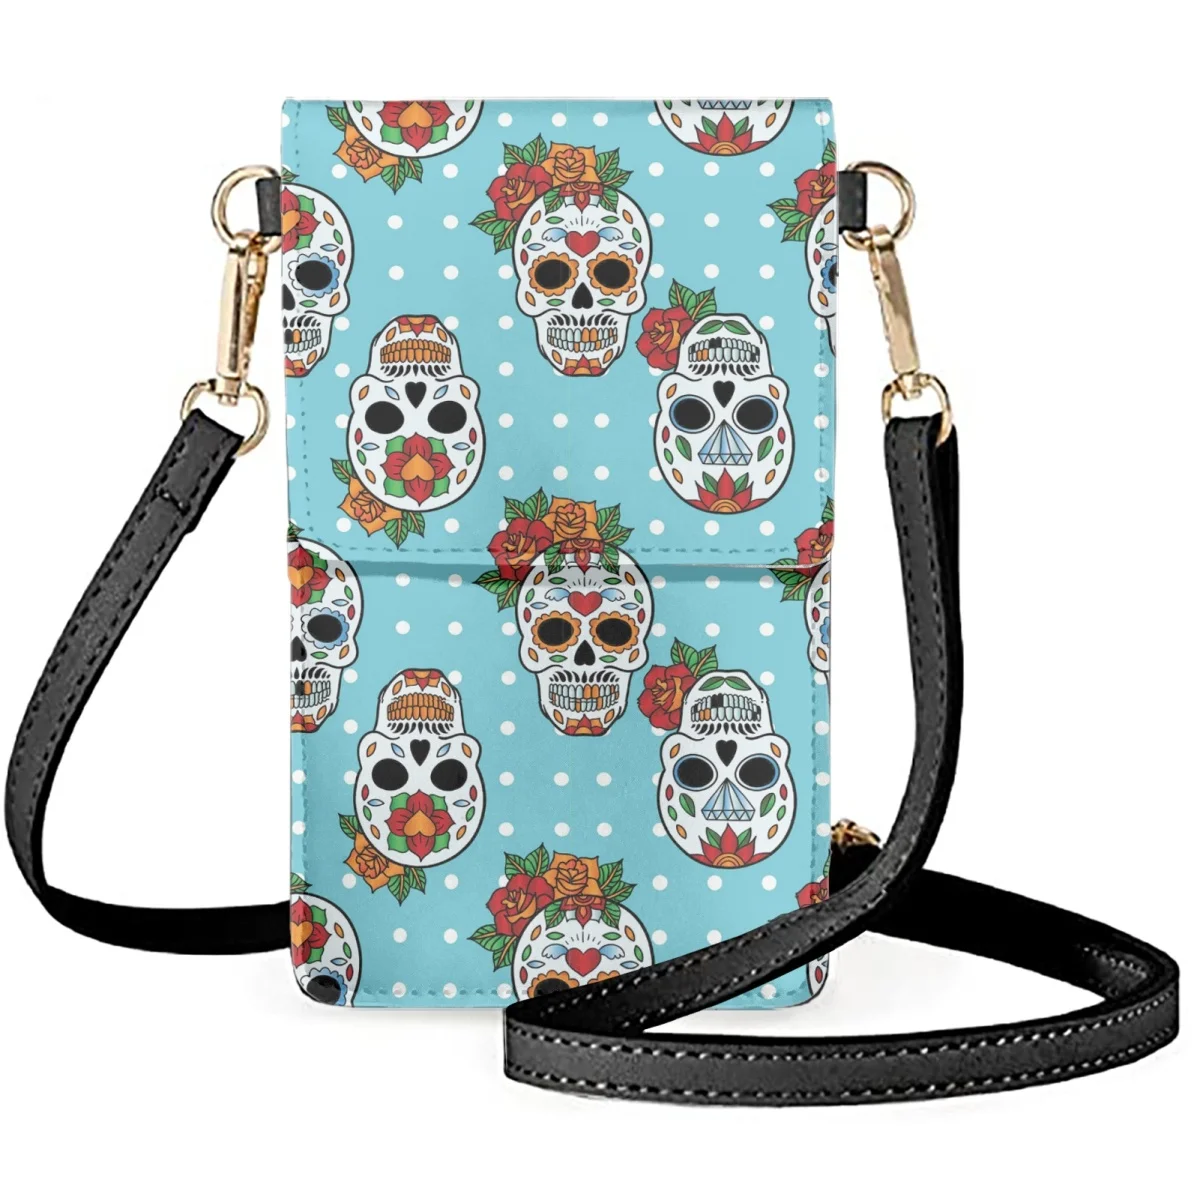 

FORUDESIGNS Good-looking Mobile Phone Bags Flap Polka-dot Floral Skull Small Item Storage Bag Girls Go Out Popular Diagonal